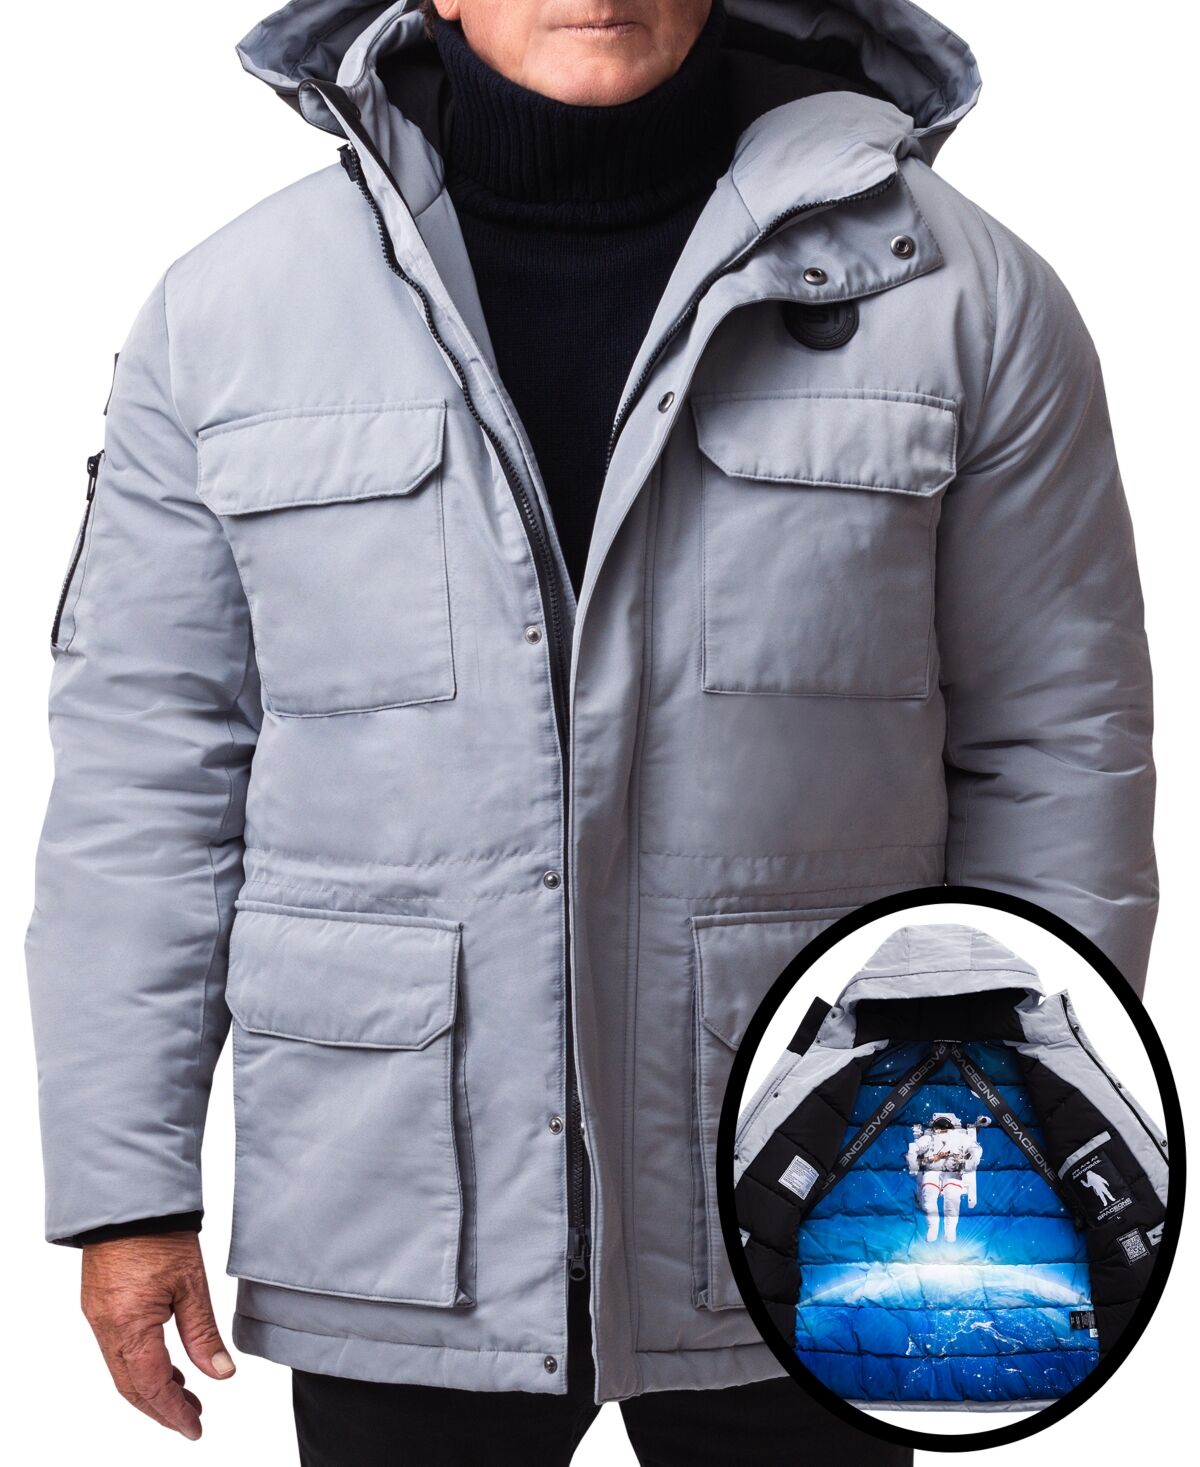 Space One Men's Nasa Inspired Parka Jacket with Printed Astronaut Interior - Gray